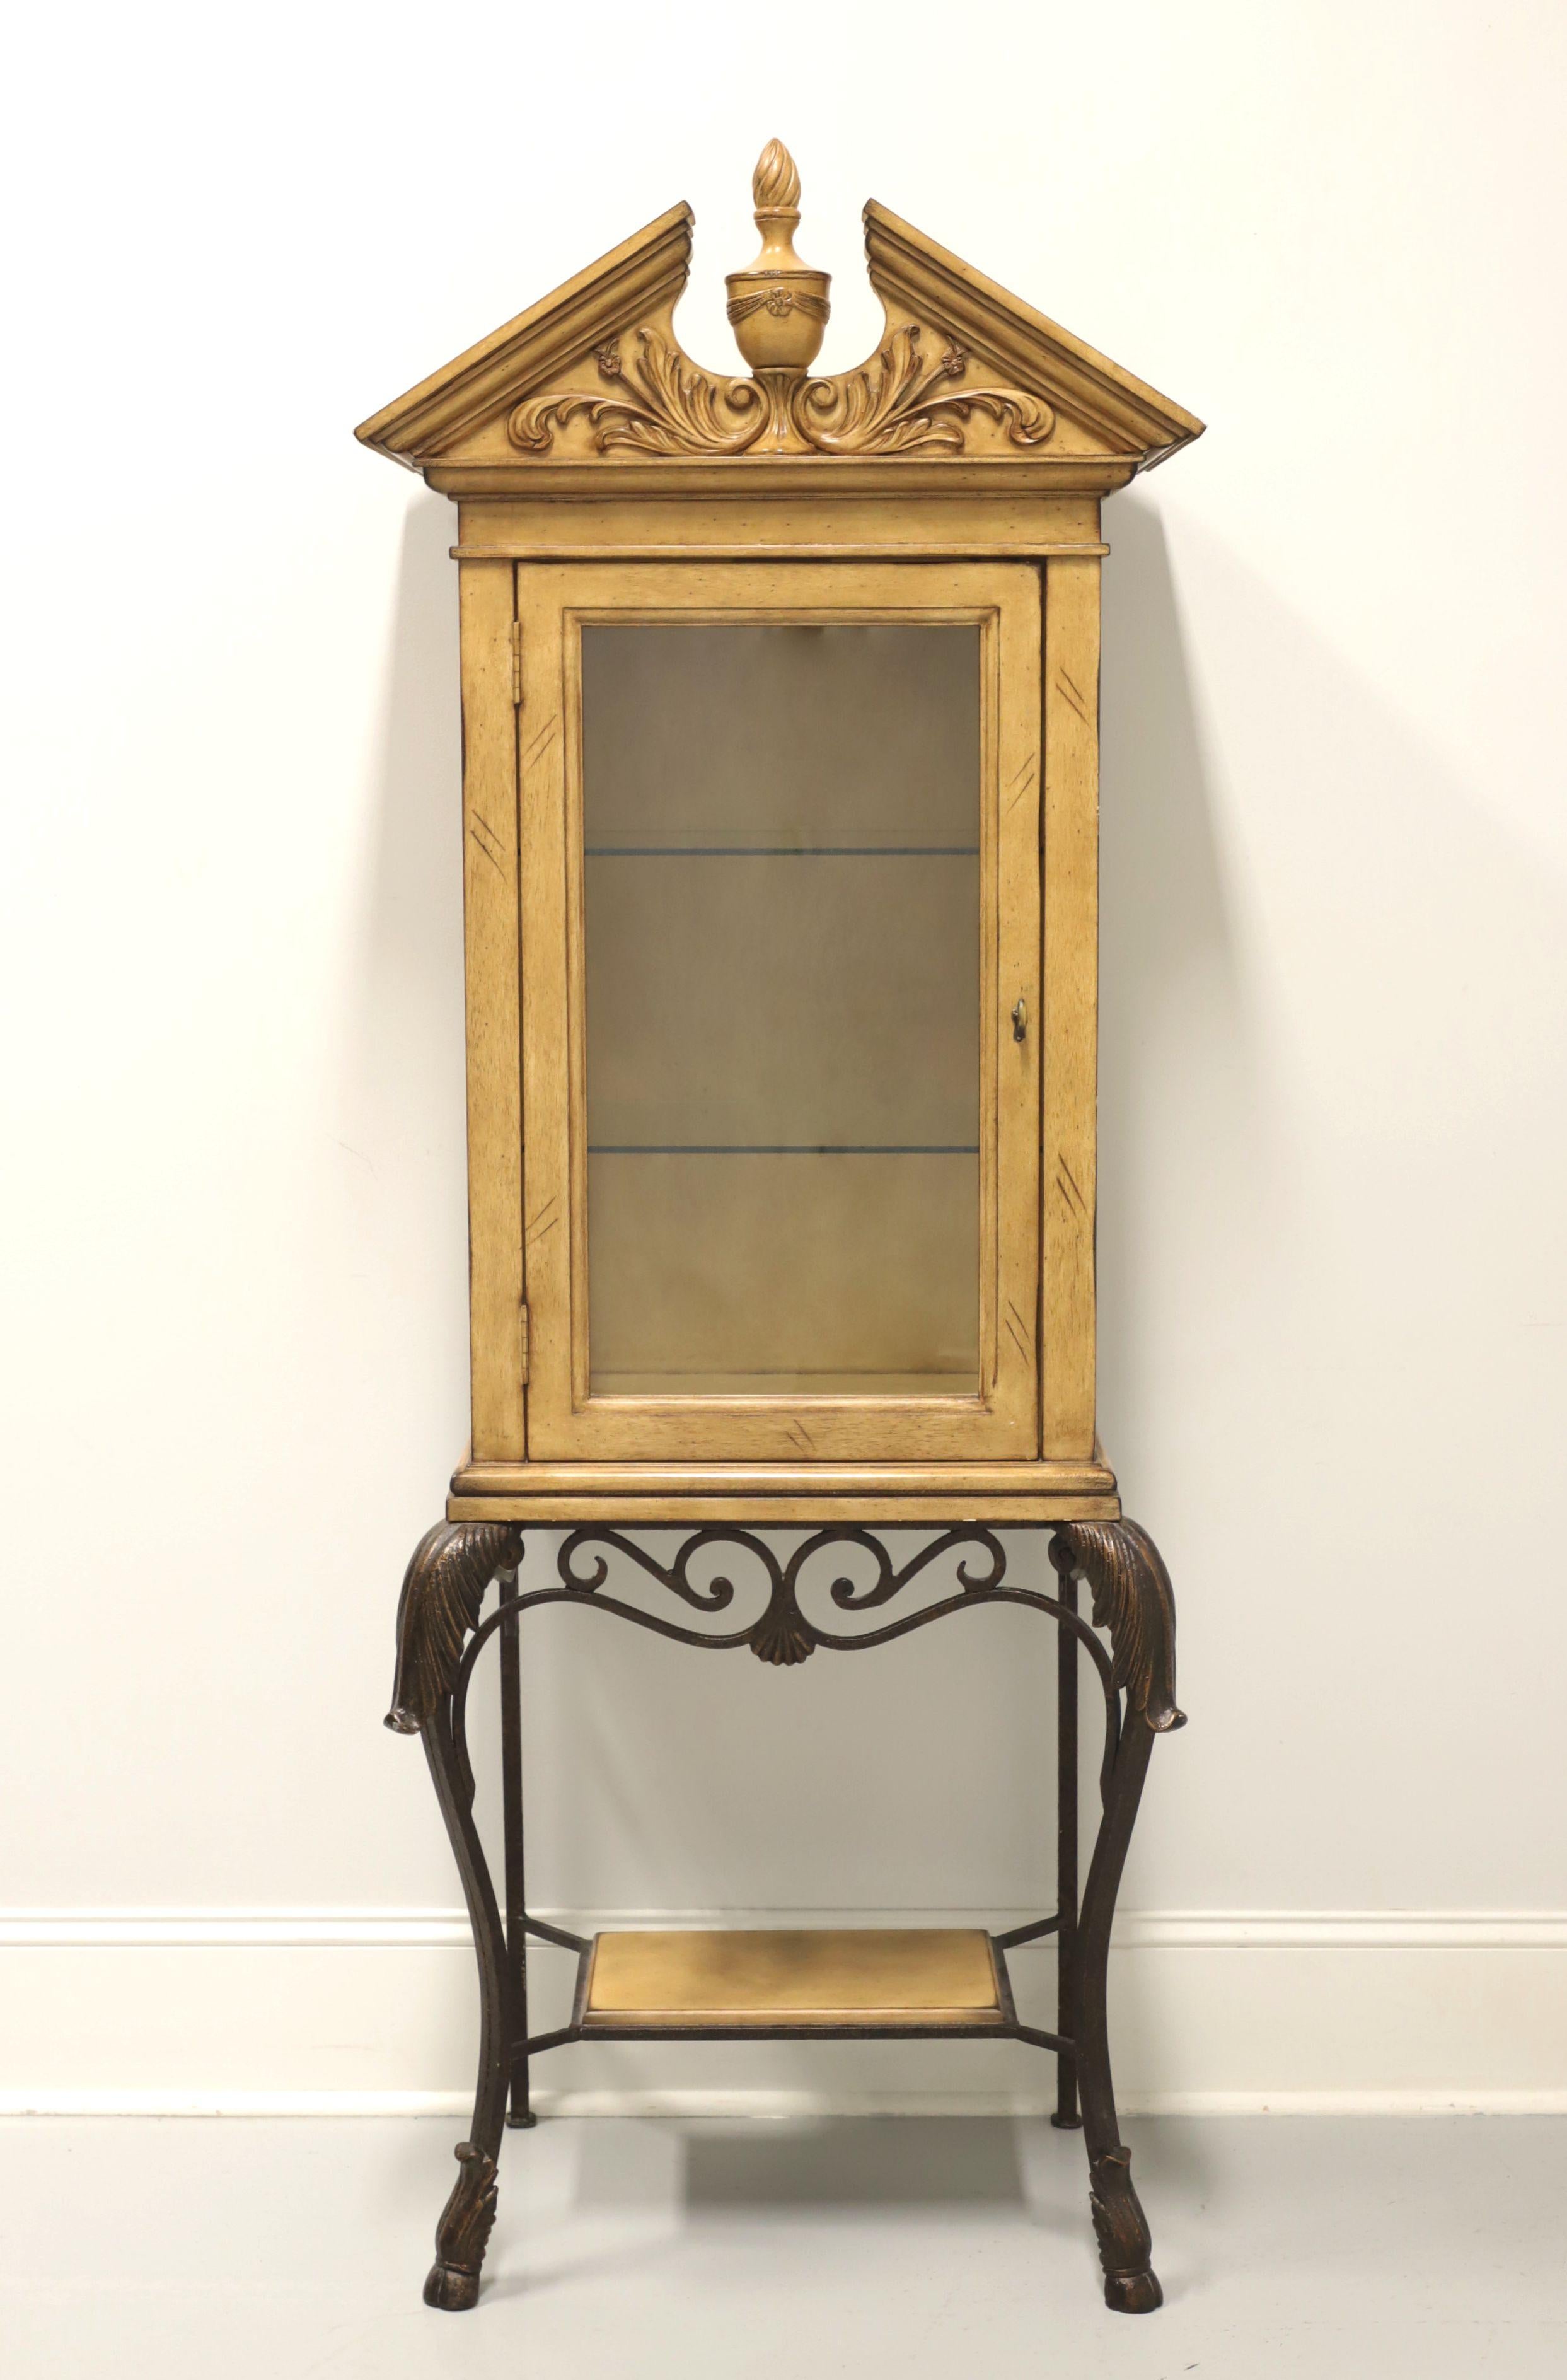 A Transitional style diminutive vitrine by Pulaski Furniture. Solid hardwood cabinet, distressed finish, brass hardware, pediment top with center finial, elevated on decorative bronze color metal base with acanthus leaves to knees, stretchers with